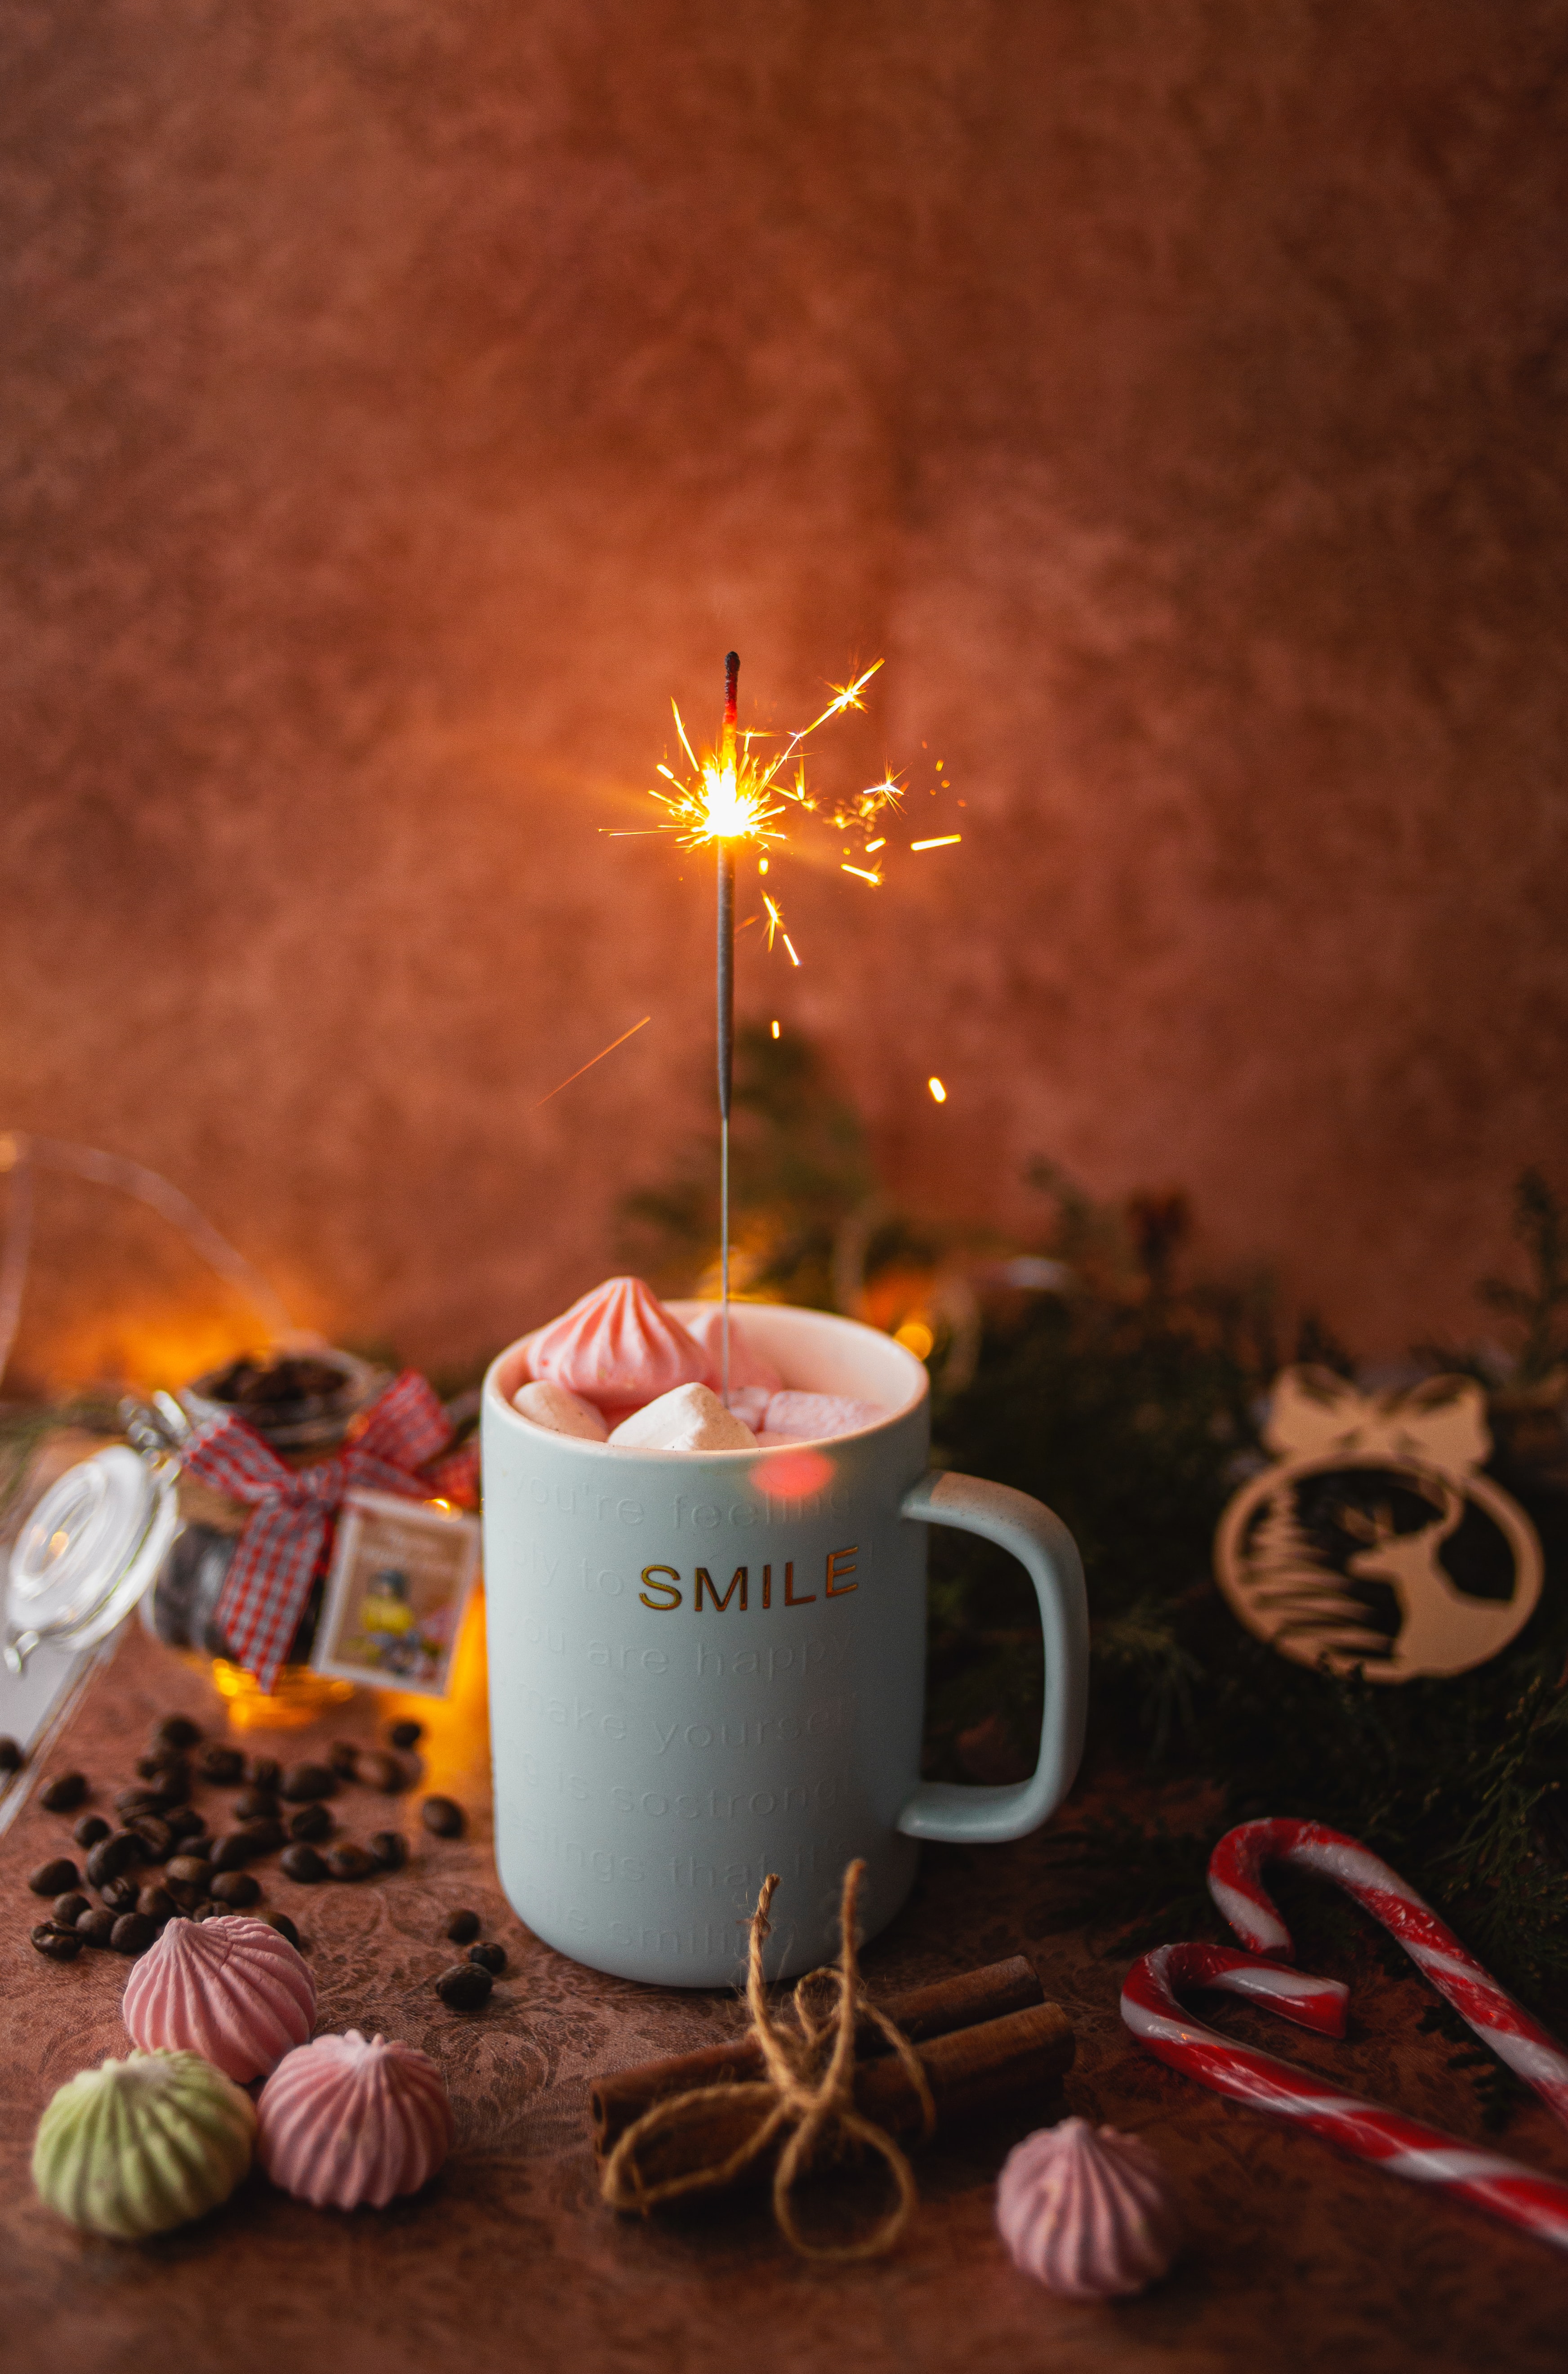 mug, miscellanea, cup, holiday, sparks, miscellaneous, marshmallow, bengal lights, sparklers, zephyr phone wallpaper